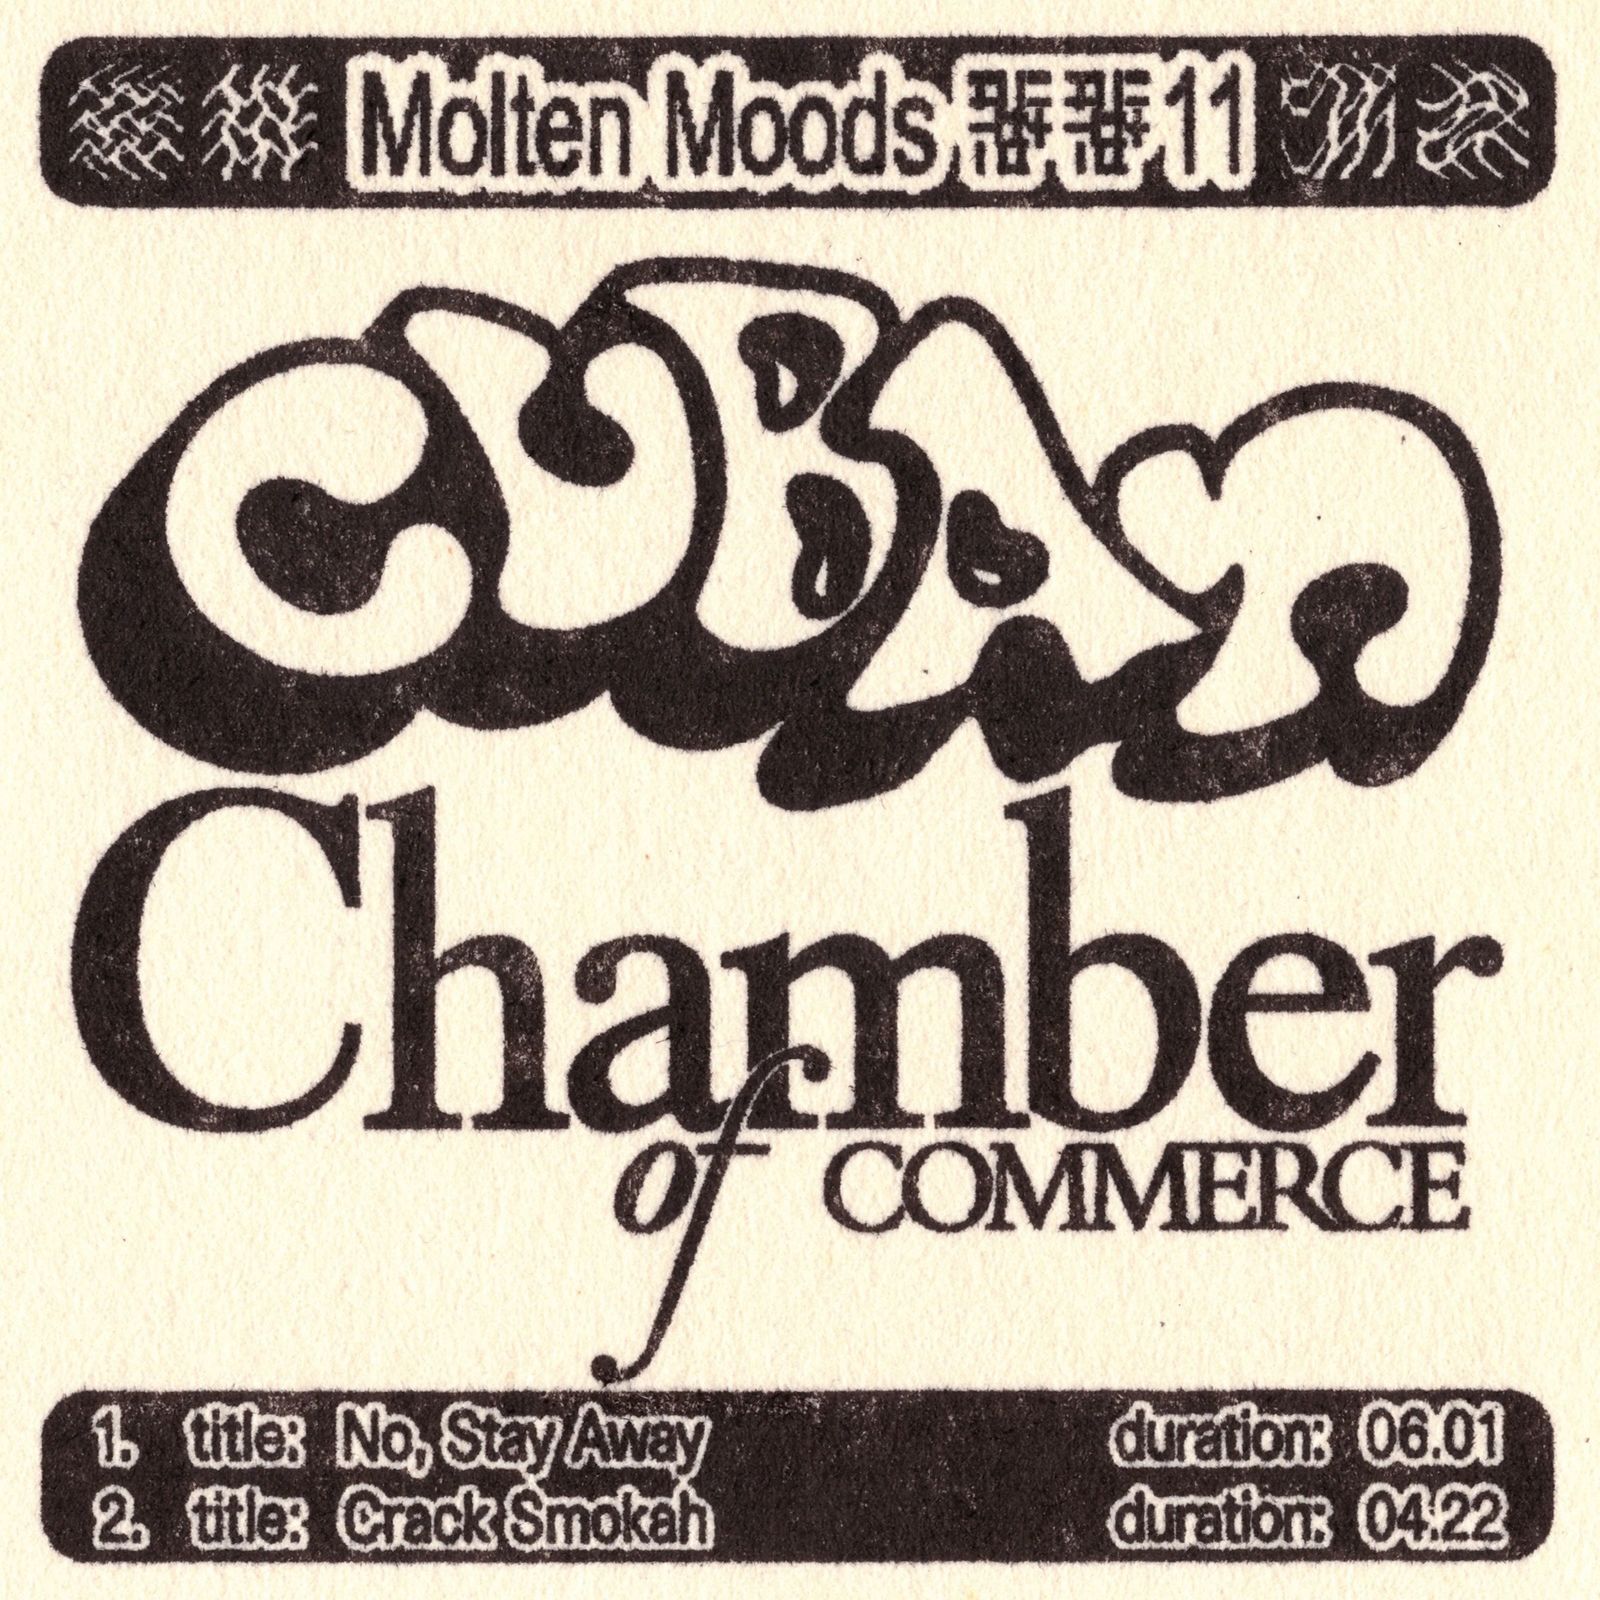 Cuban Chamber of Commerce - No, Stay Away (Download Code) 